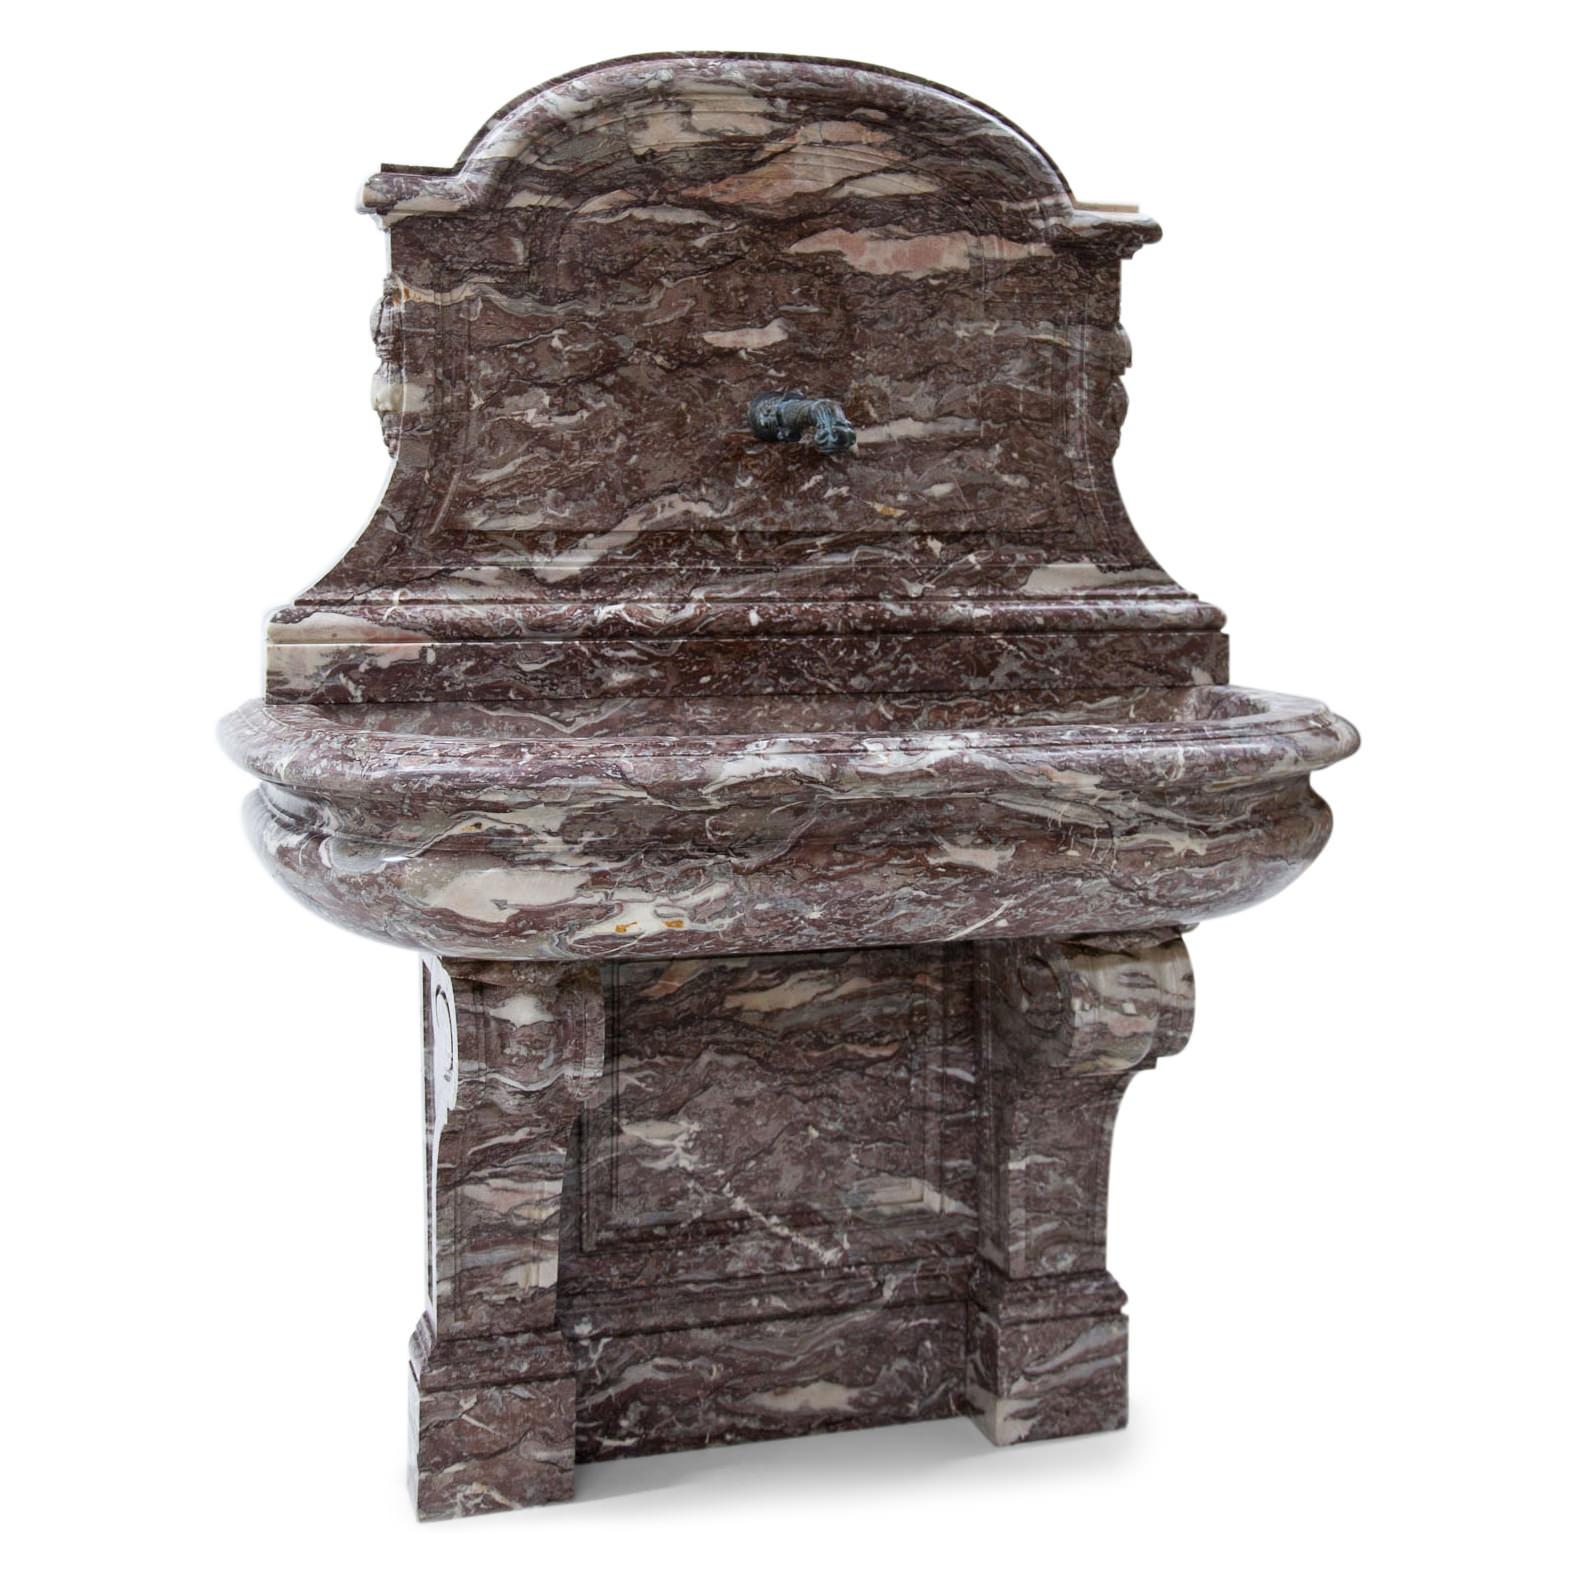 Lilac wall fountain out of hand carved Belgian marble. The basin is at a height of 95 cm and rests on volute supports; its interior dimensions are 15 x 112 x 38 cm. The wall is profiled. The rear wall shows a segment pediment with slightly concave